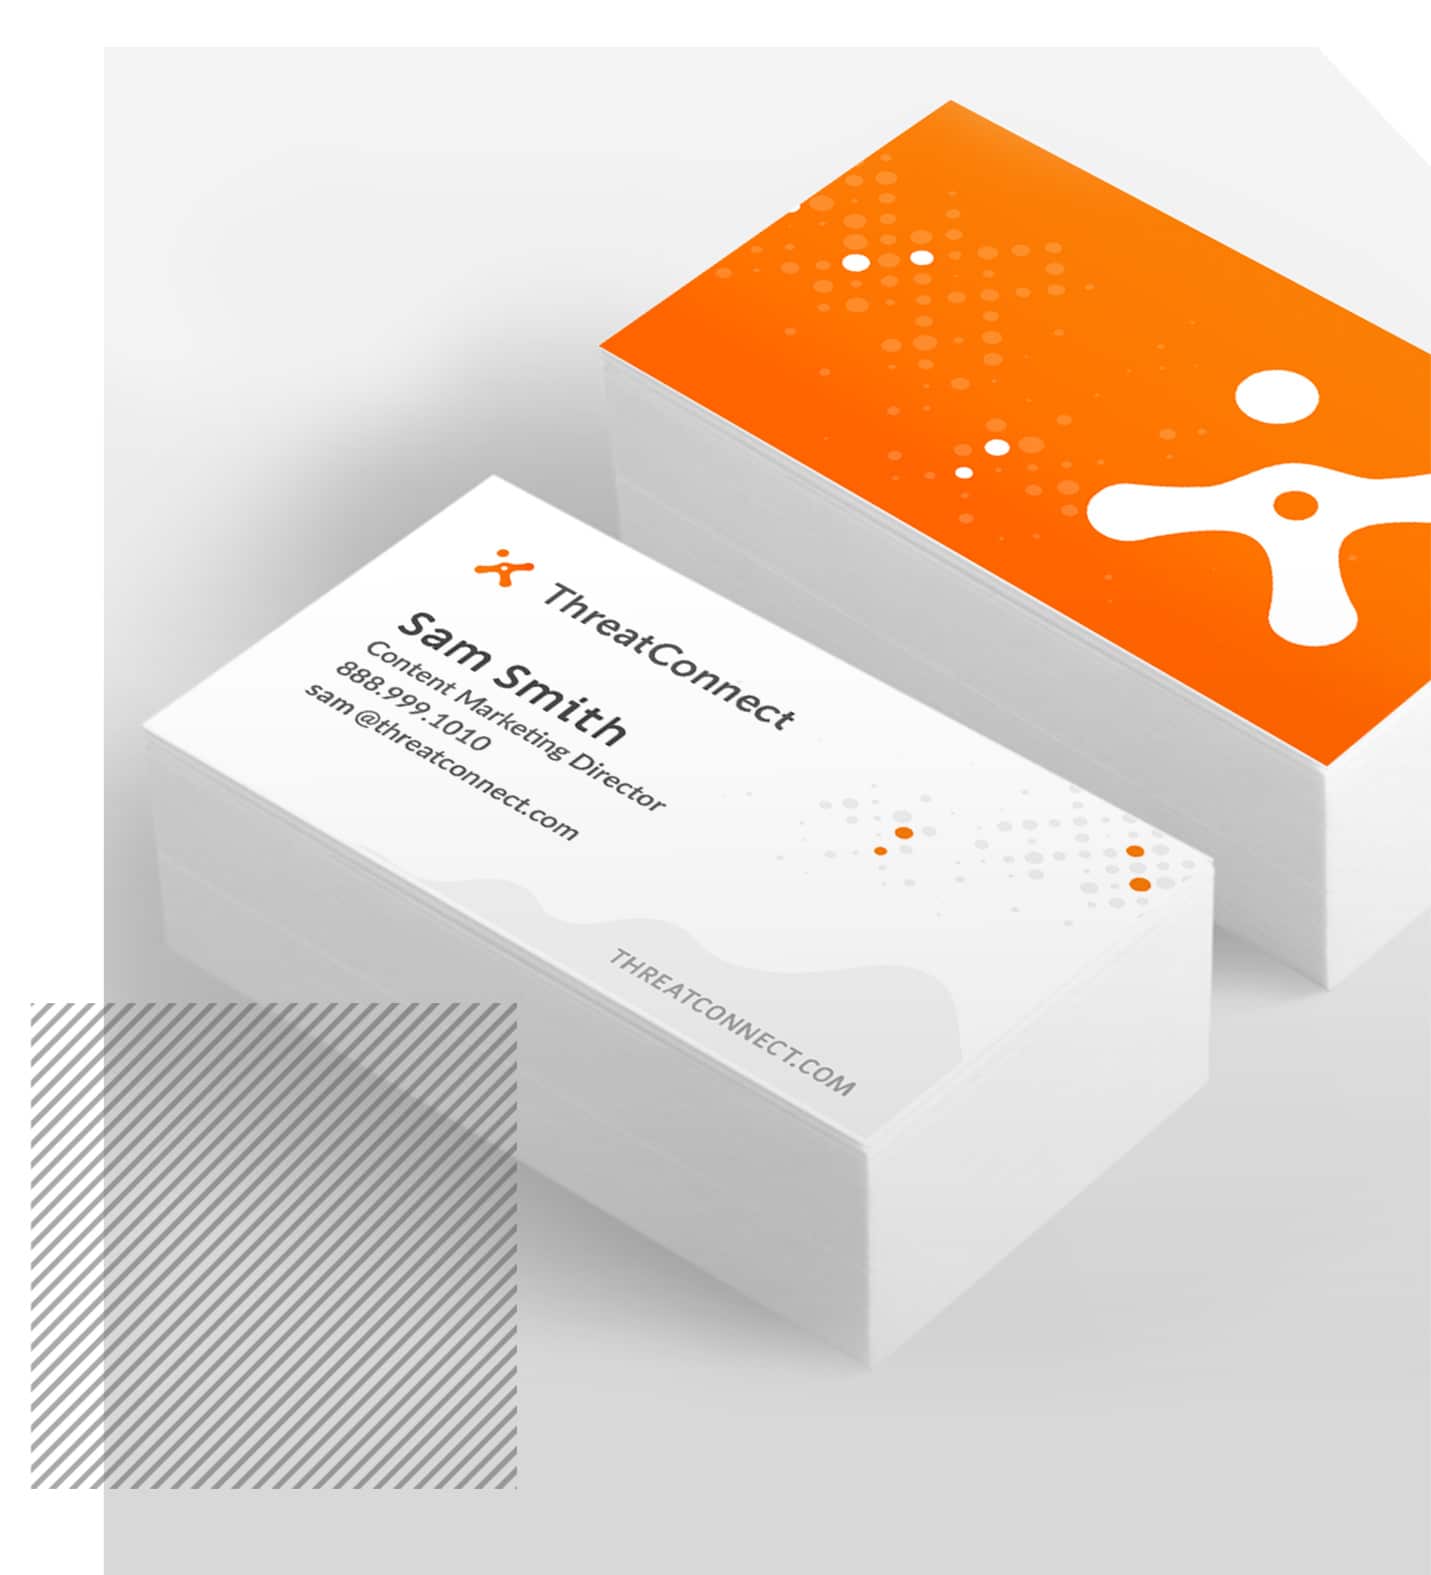 Punch - ThreatConnect Website Sidebar Business Cards